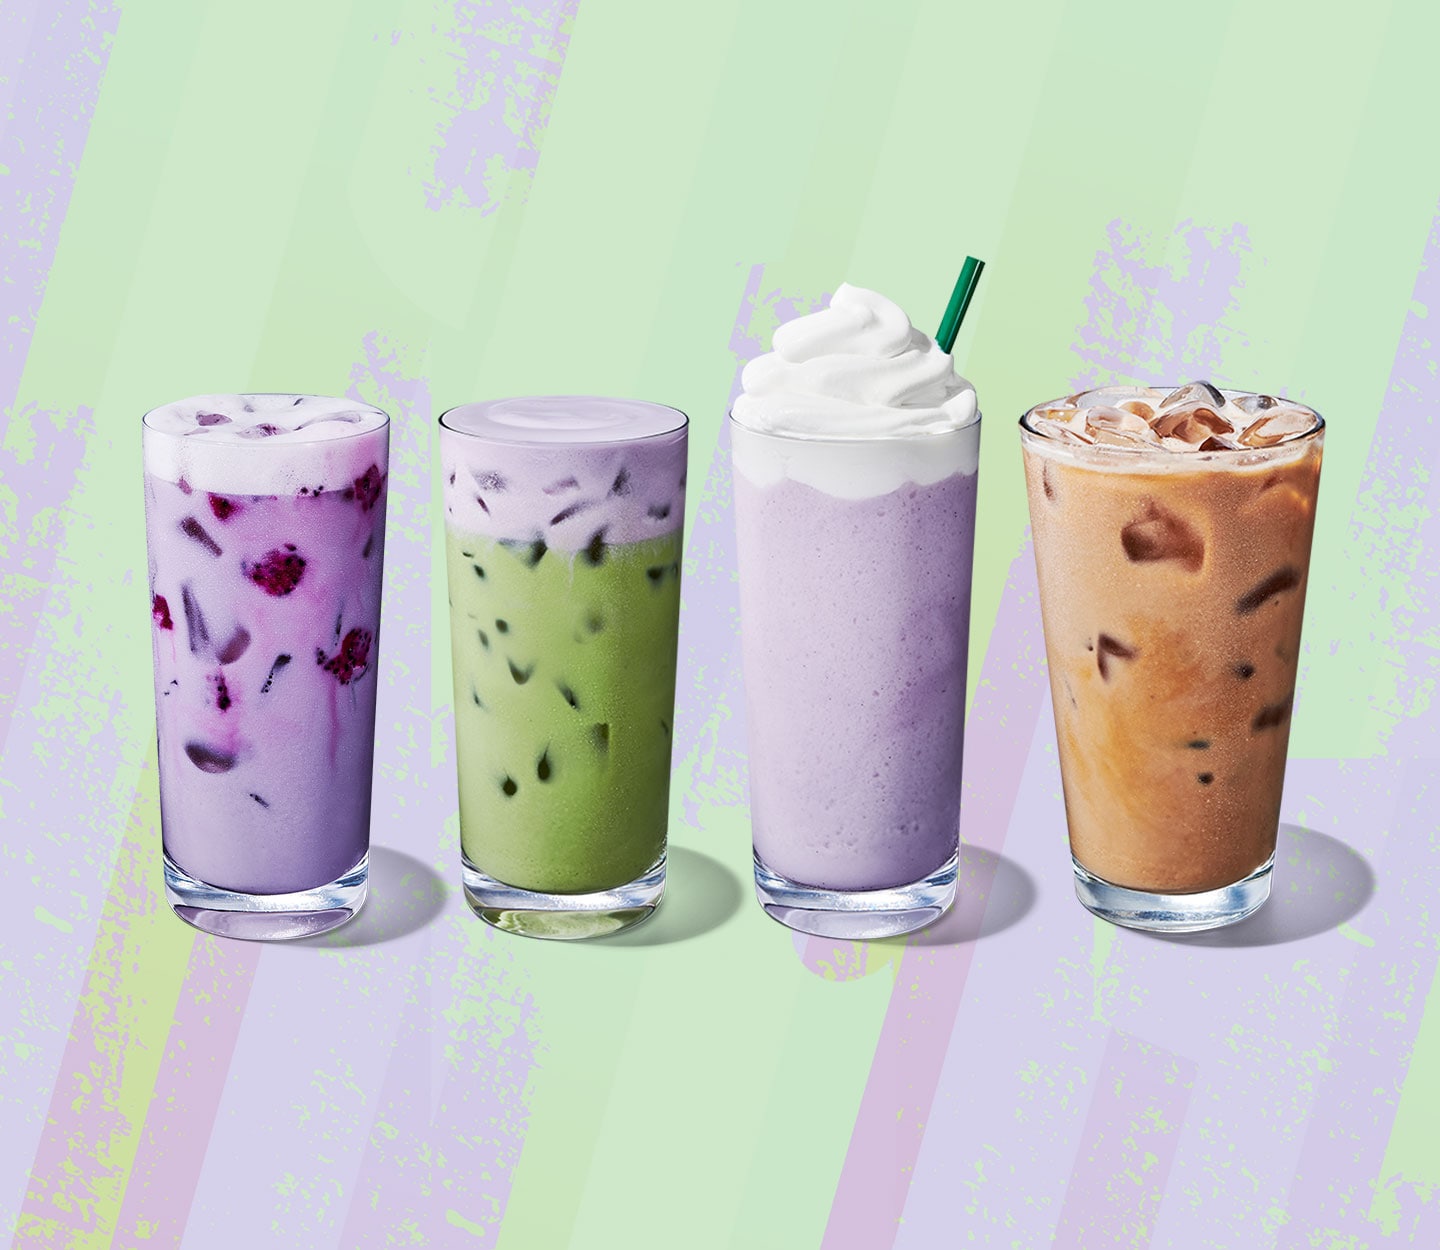 Four cold drinks in tall glasses. One is purple with fruit bits, one is green with creamy foam, one is light brown, and one is pale purple with whipped cream and a straw.